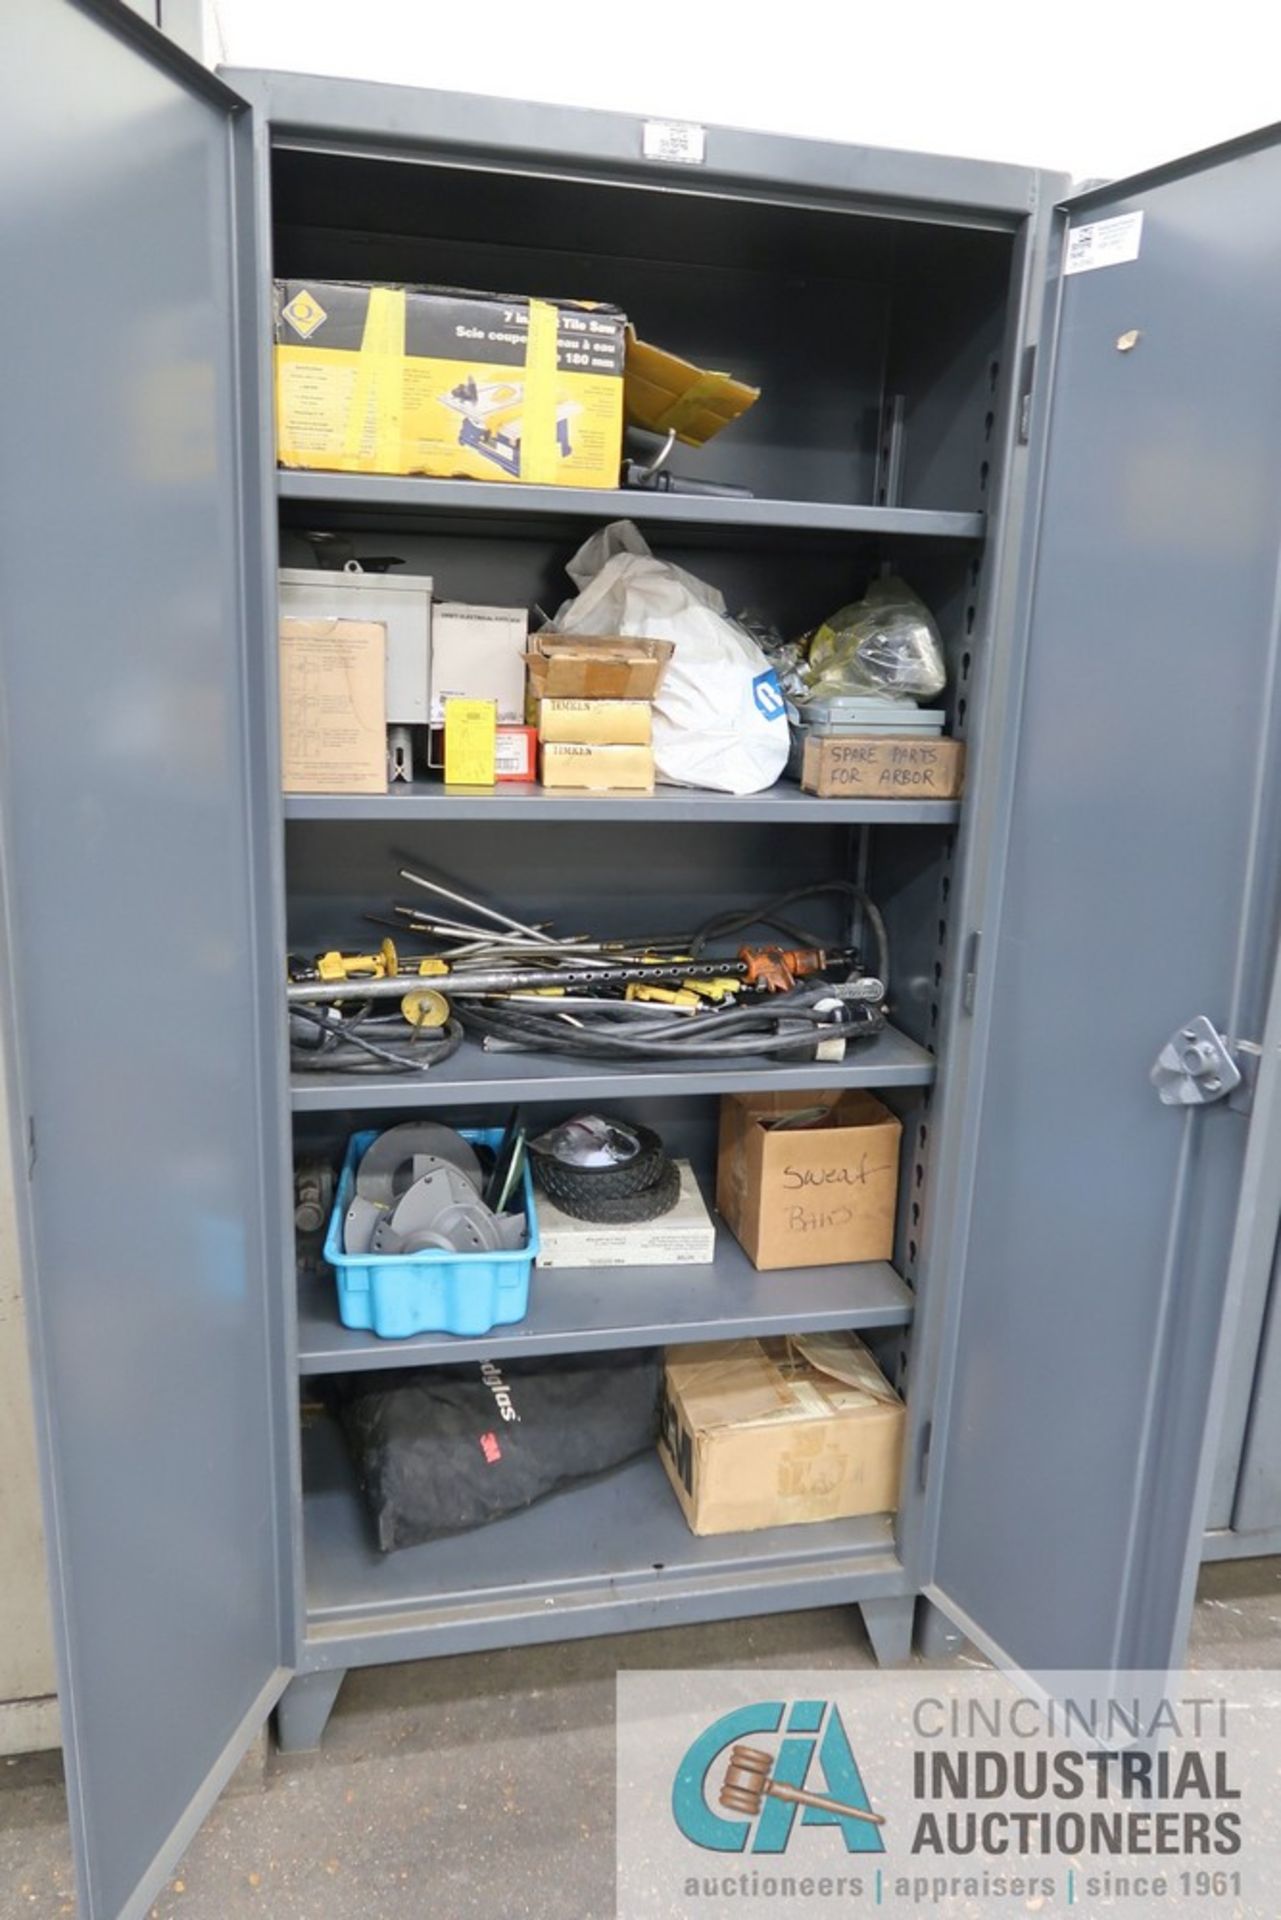 (LOT) MISCELLANEOUS SHOP EQUIPMENT AND PARTS WITH STRONGHOLD STORAGE CABINET - Image 2 of 6